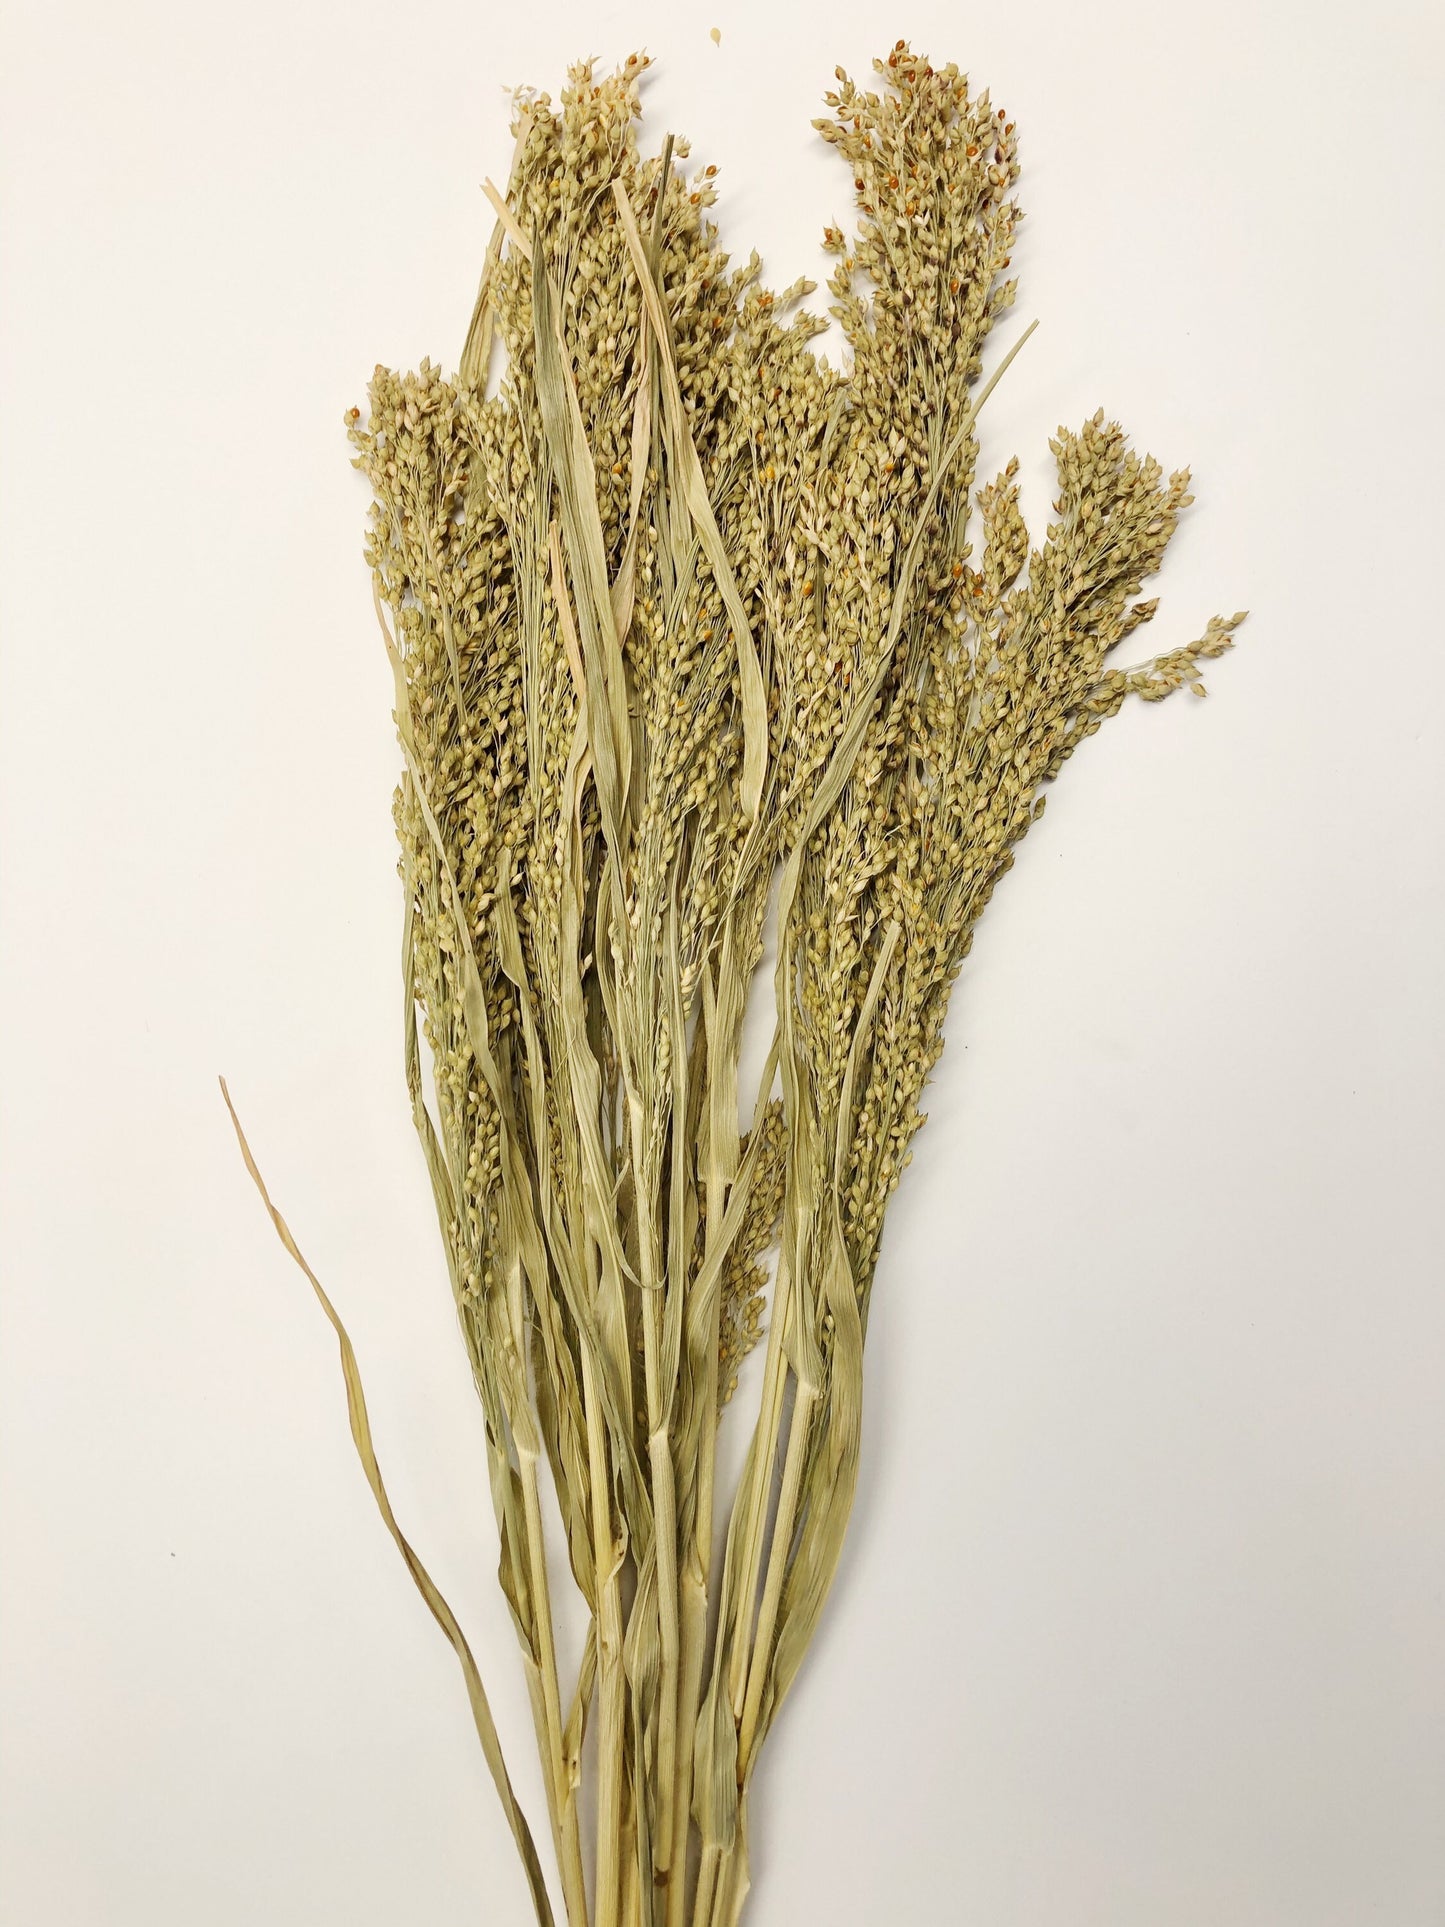 Panicum Grass, Wheat, Dried, Wheat, Preserved Flowers, Floral, Home Decor, Herbs, Millets, Cereal Grains, Wheats and Grass, Filler, Fall